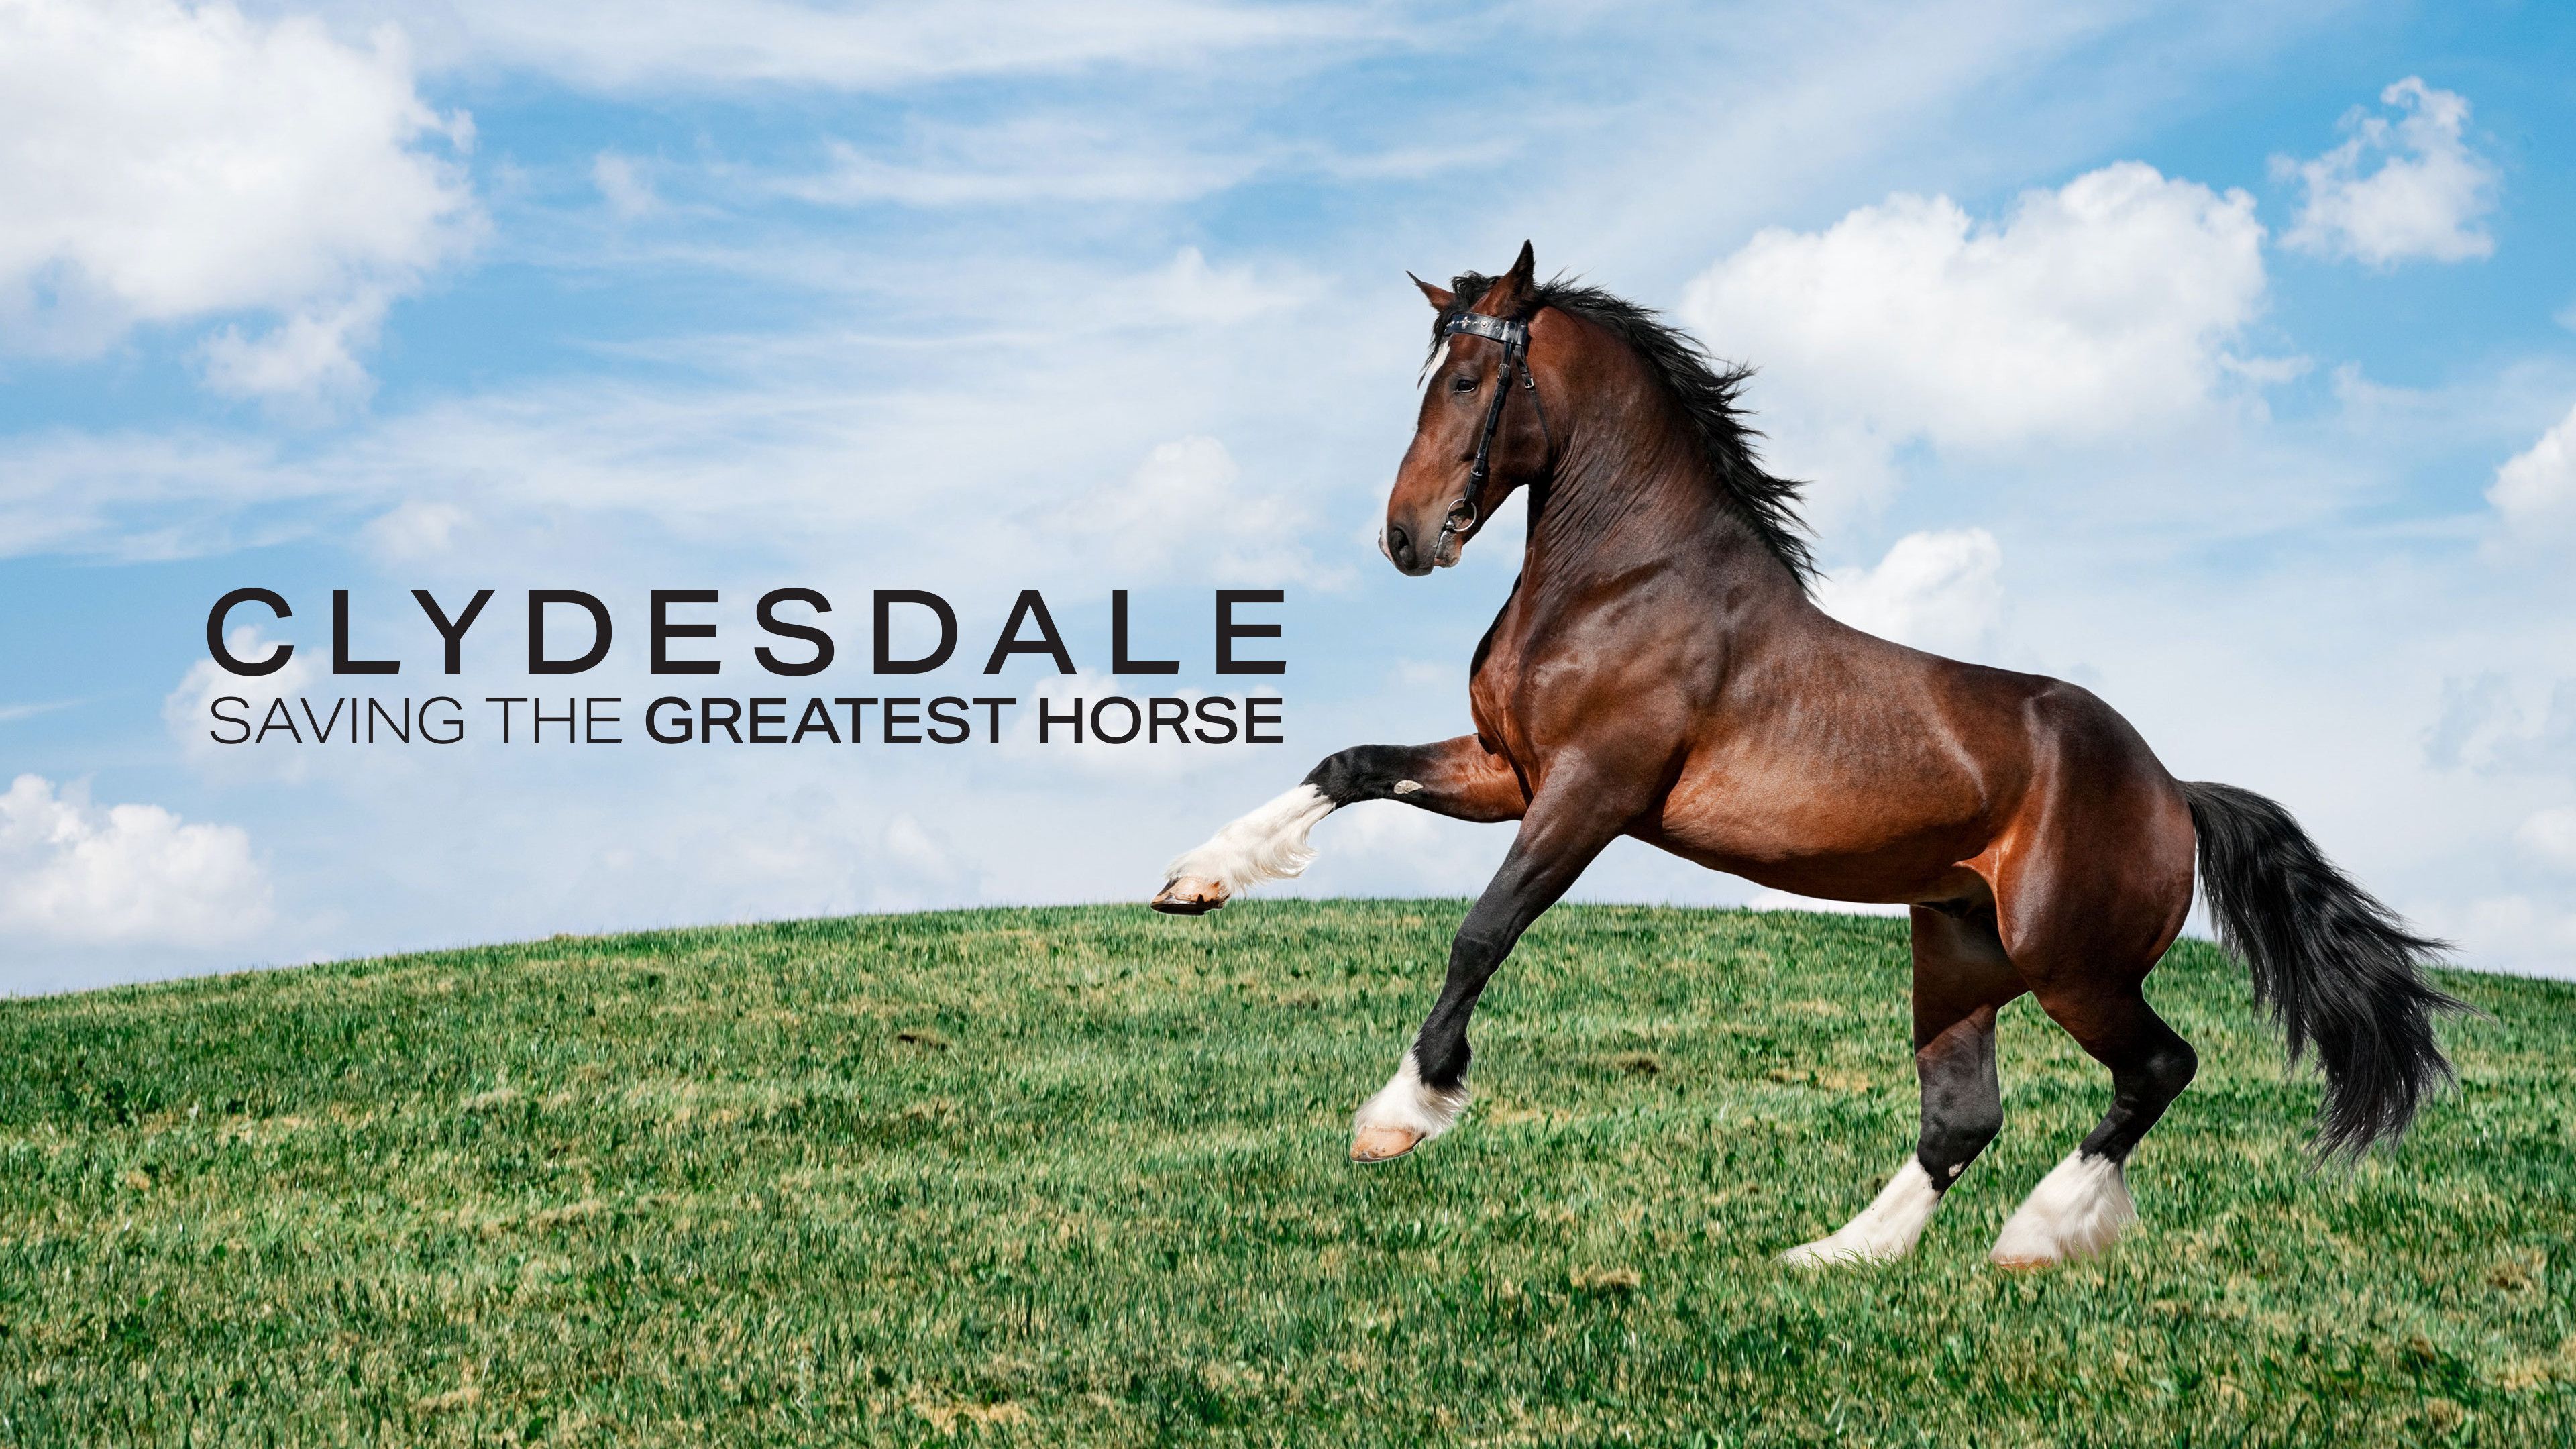 Clydesdale: Saving The Greatest Horse